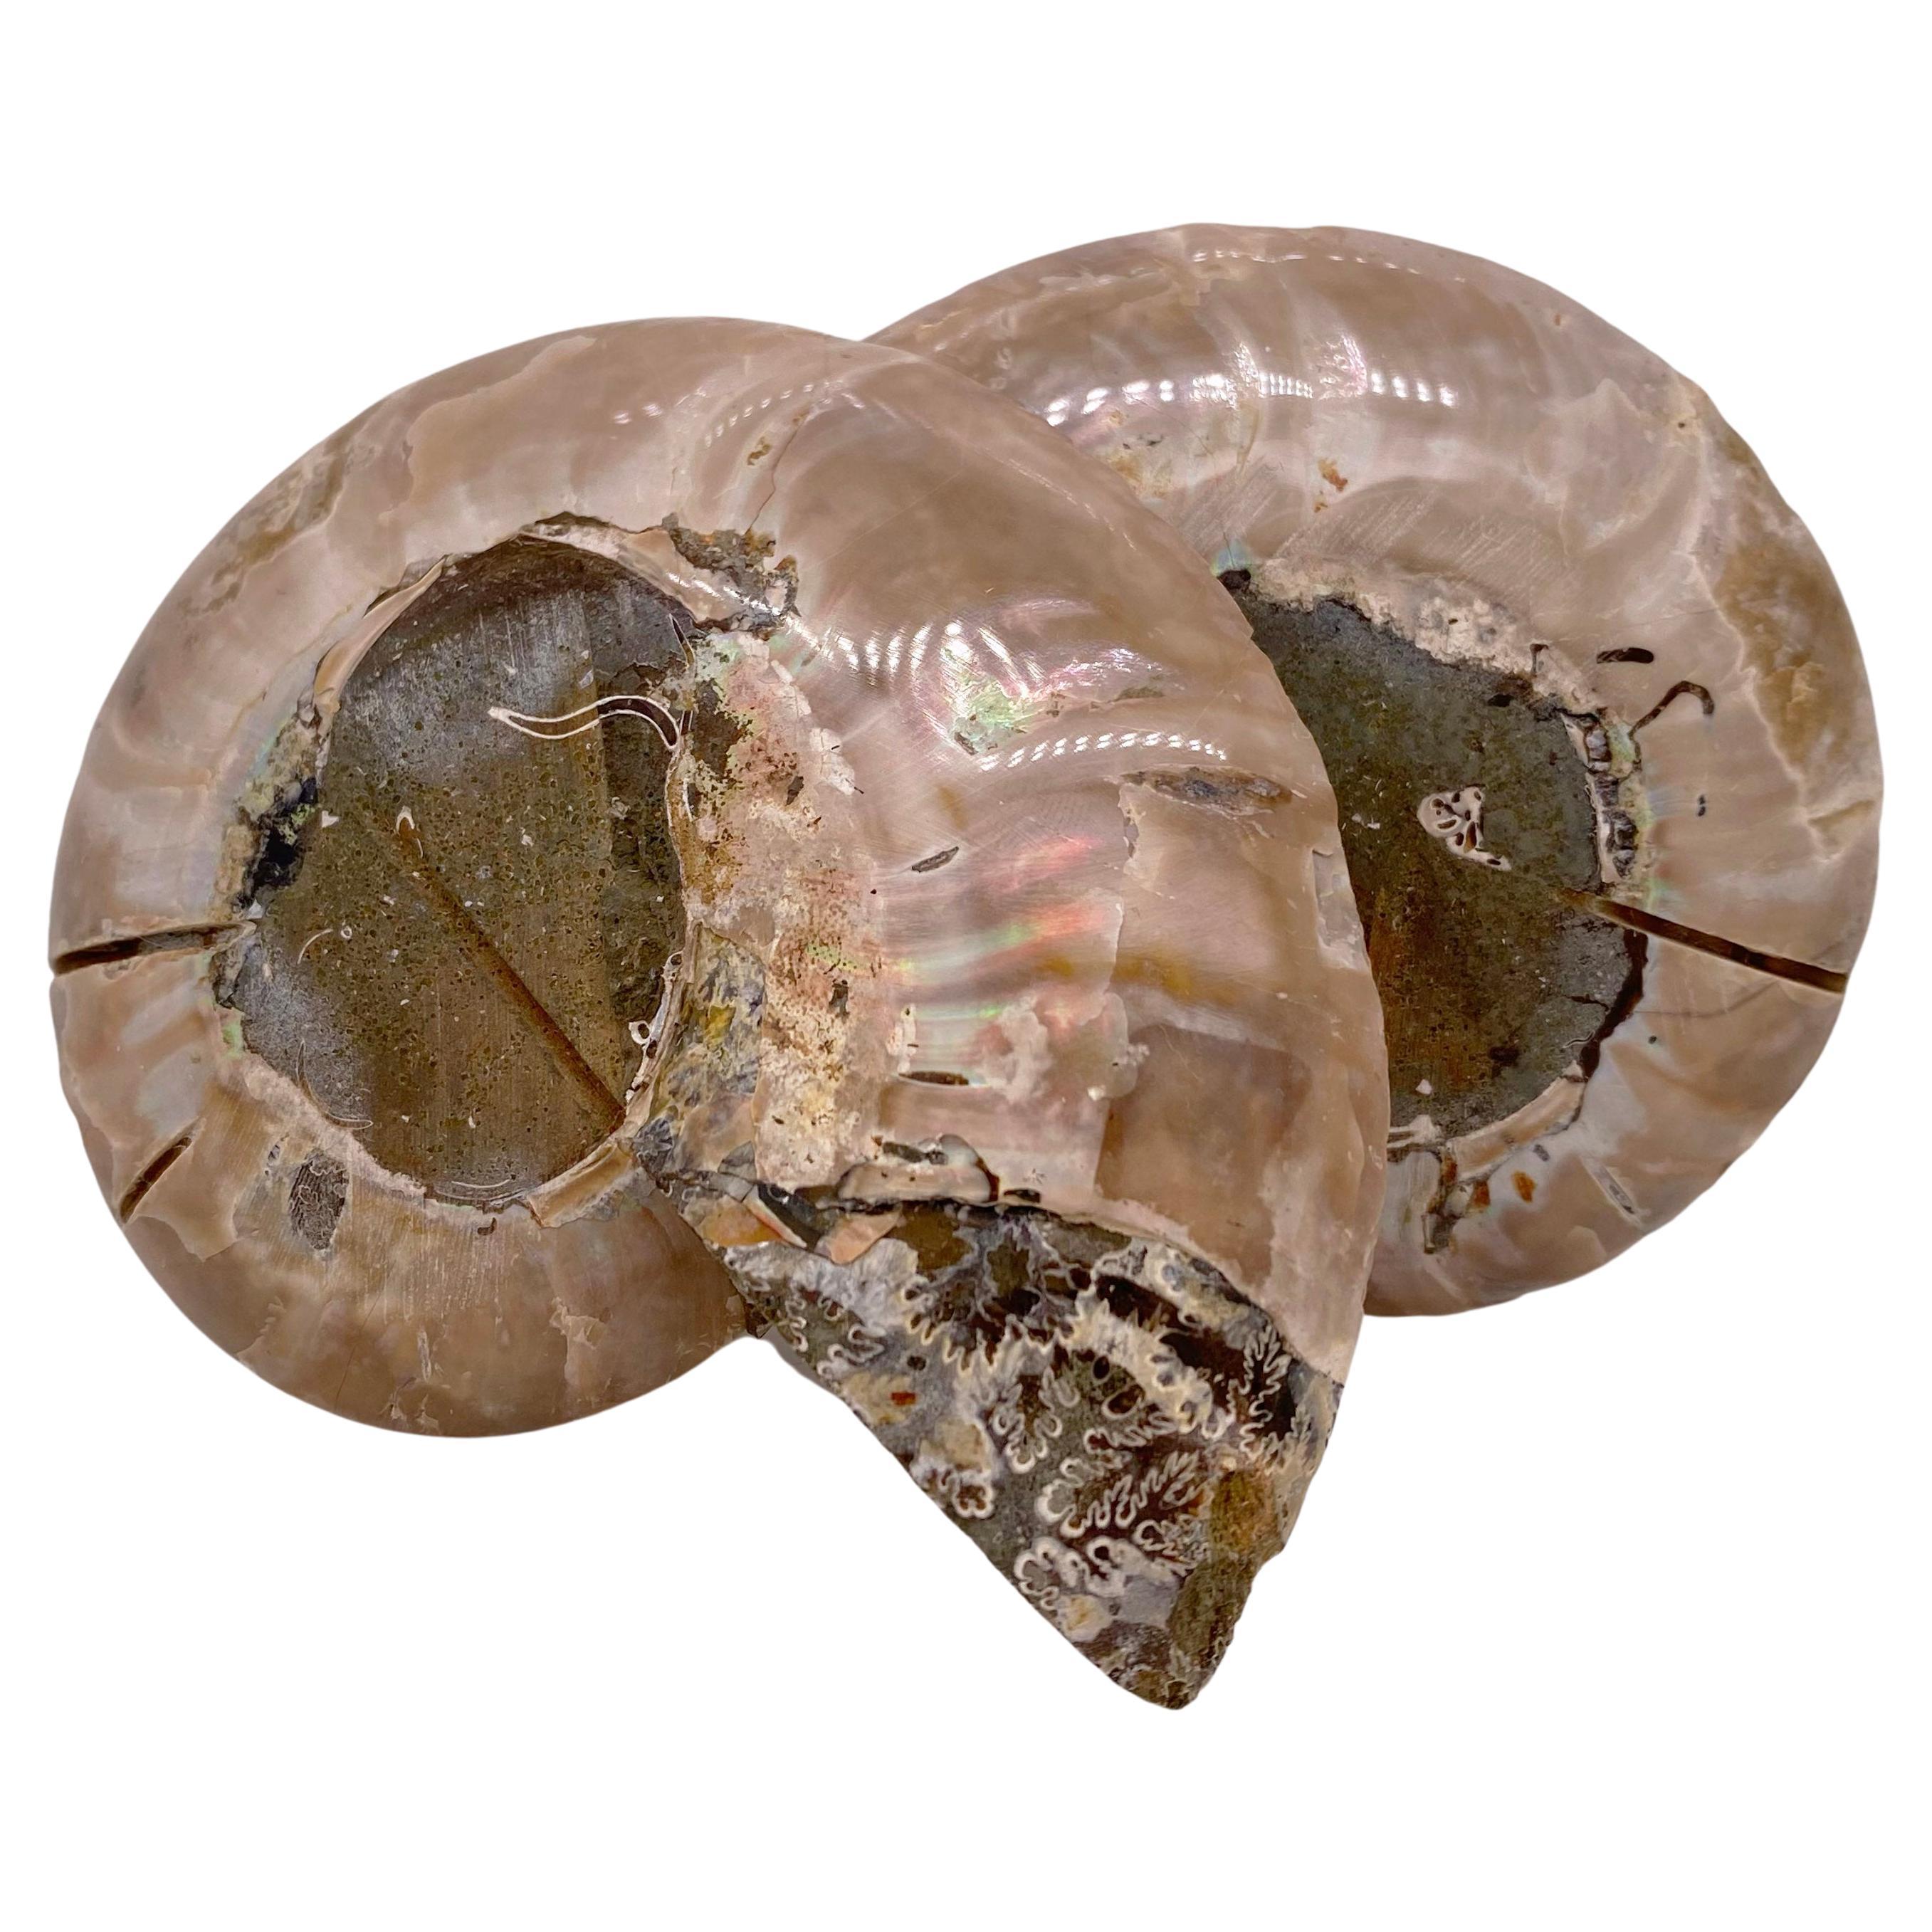 The history of an Ammonite dates back 400 million years ago during the Jurassic period when this marine animal once roamed the oceans. Since their extinction, Ammonite has been searched for as buyers are fond of their natural beauty and district